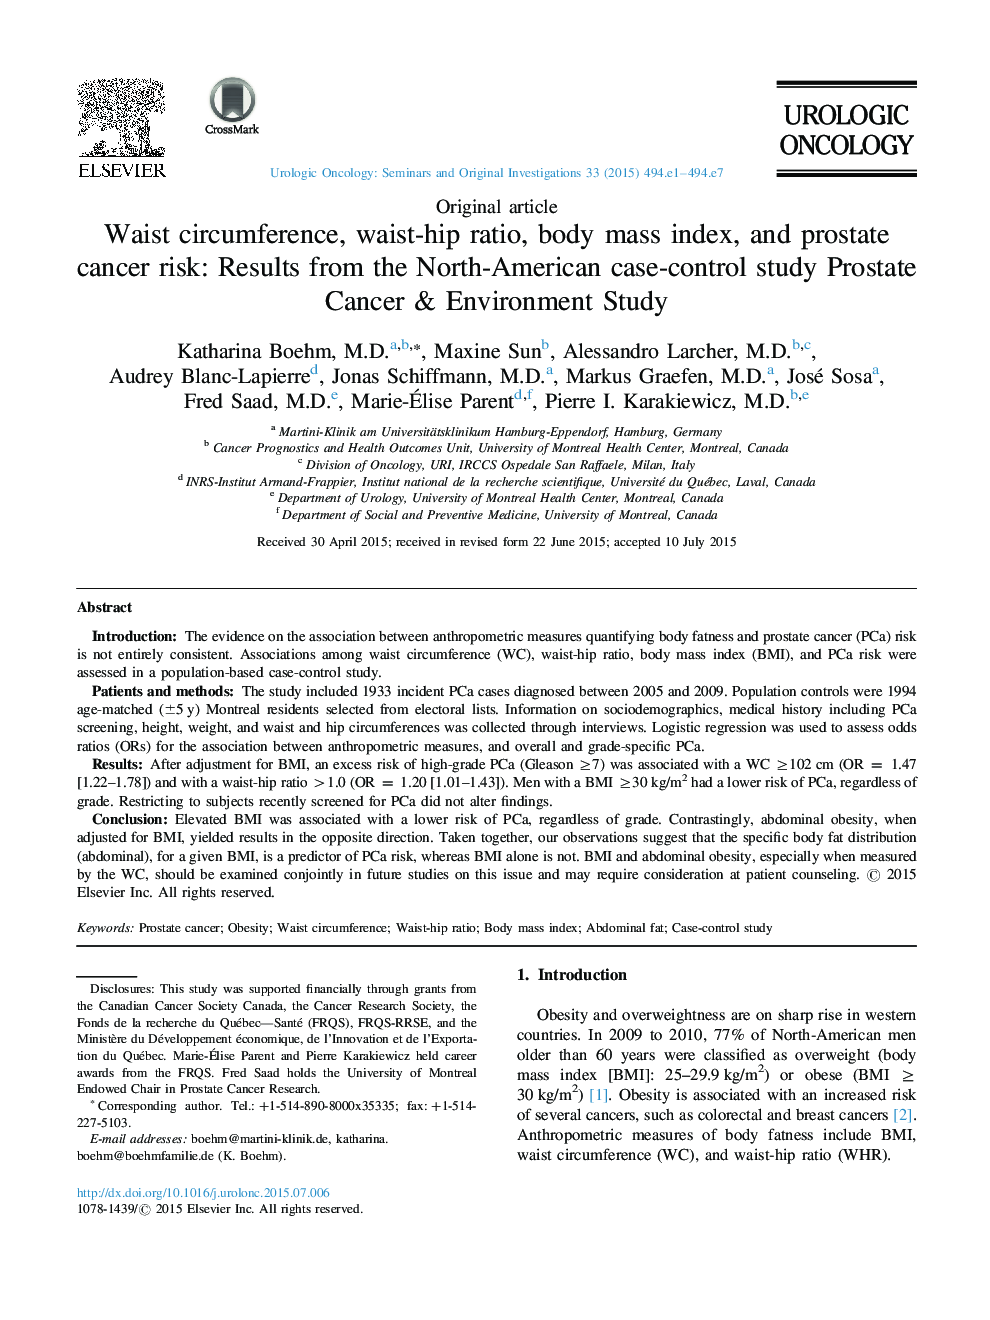 Waist circumference, waist-hip ratio, body mass index, and prostate cancer risk: Results from the North-American case-control study Prostate Cancer & Environment Study